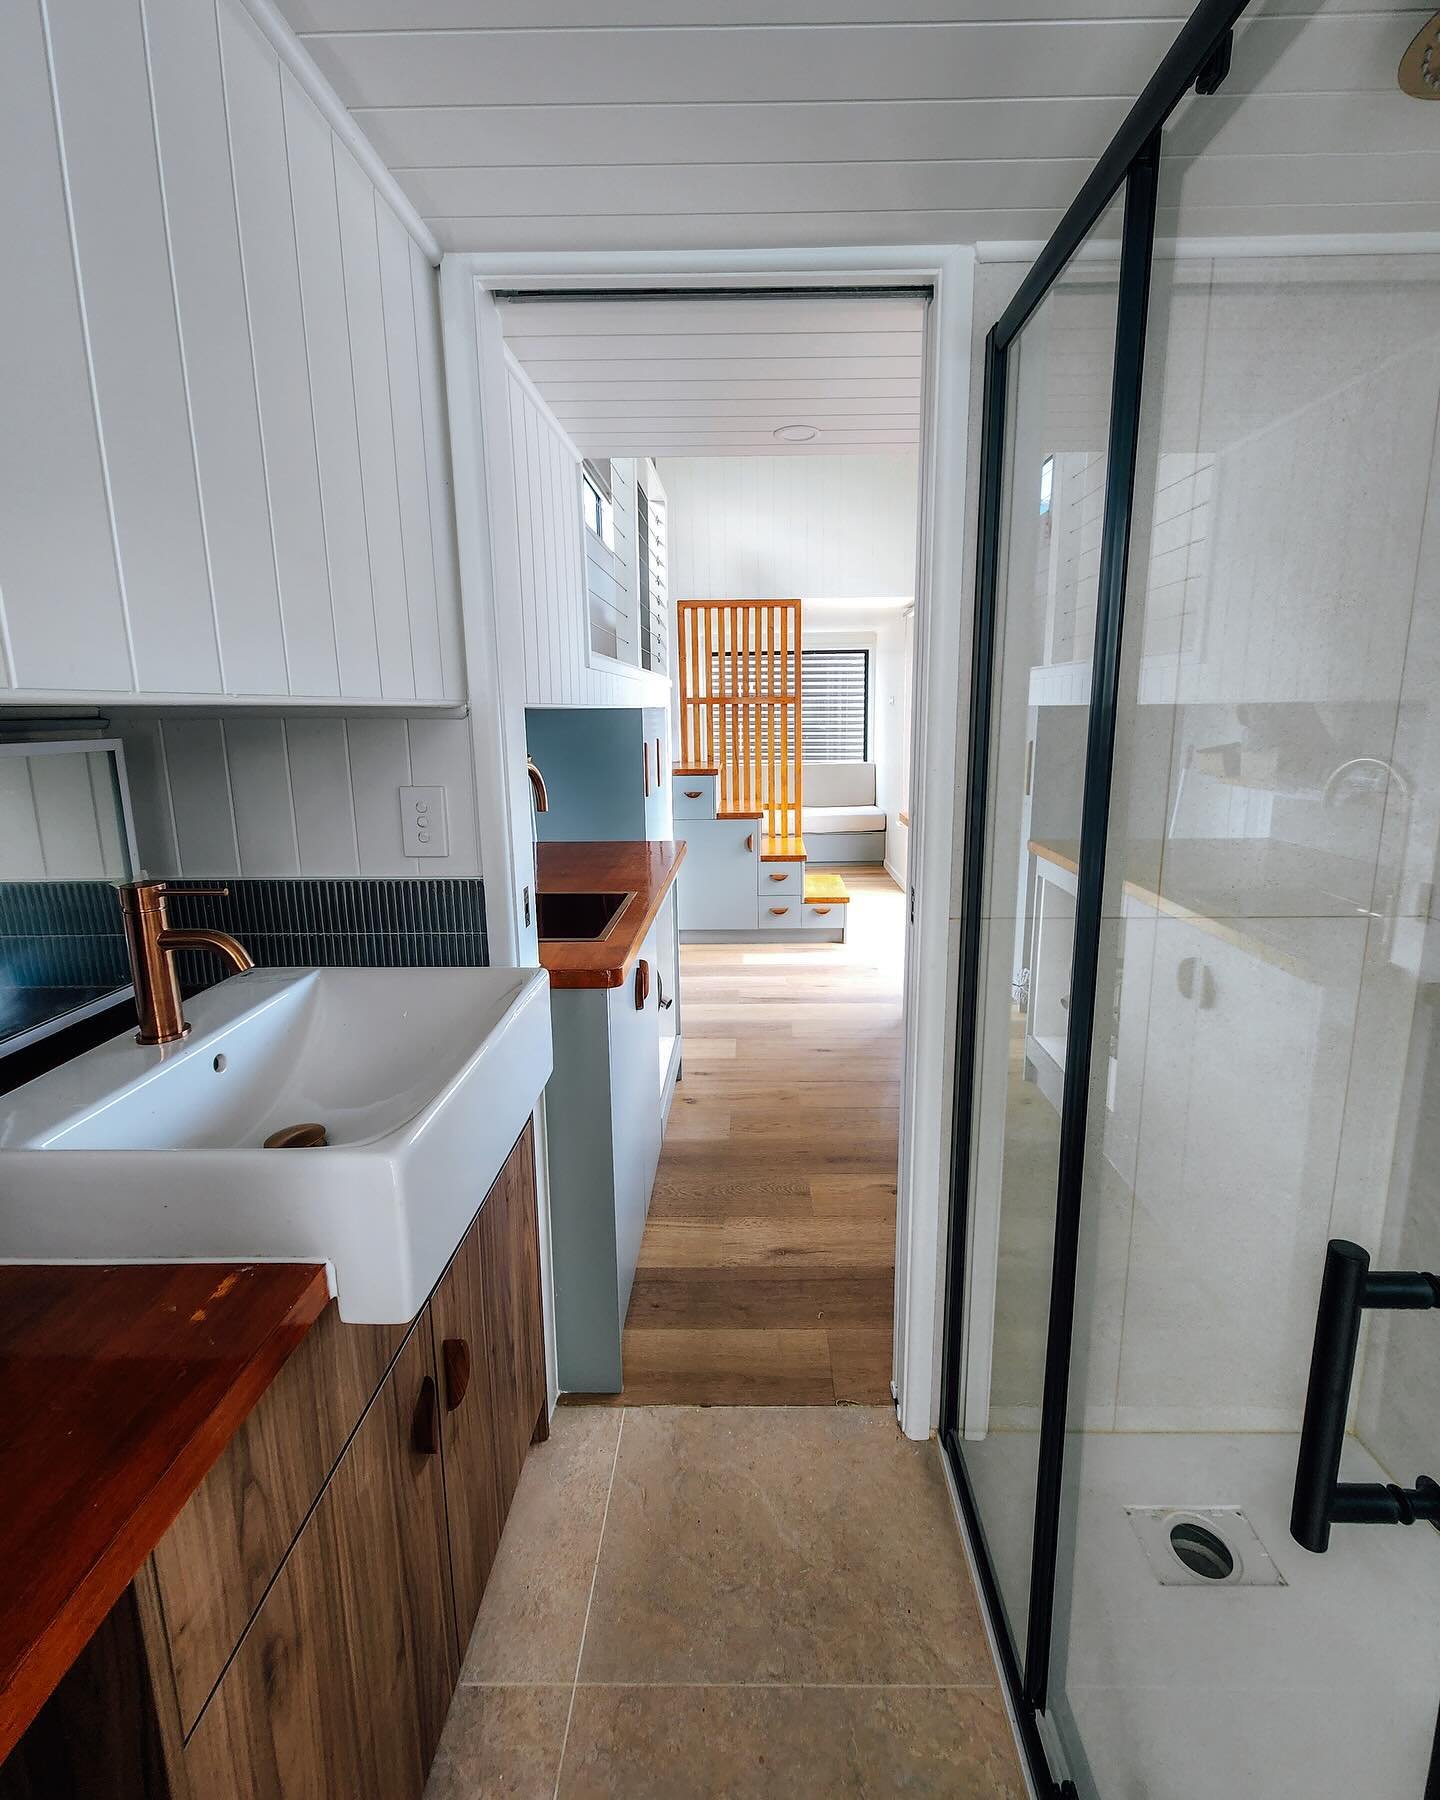 Sneak peak of our new model coming soon&hellip; this tiny home was built in collaboration with an ergonomics specialist, meaning all customising was done with liveability and functionality as a primary focus!! 🙌🏼